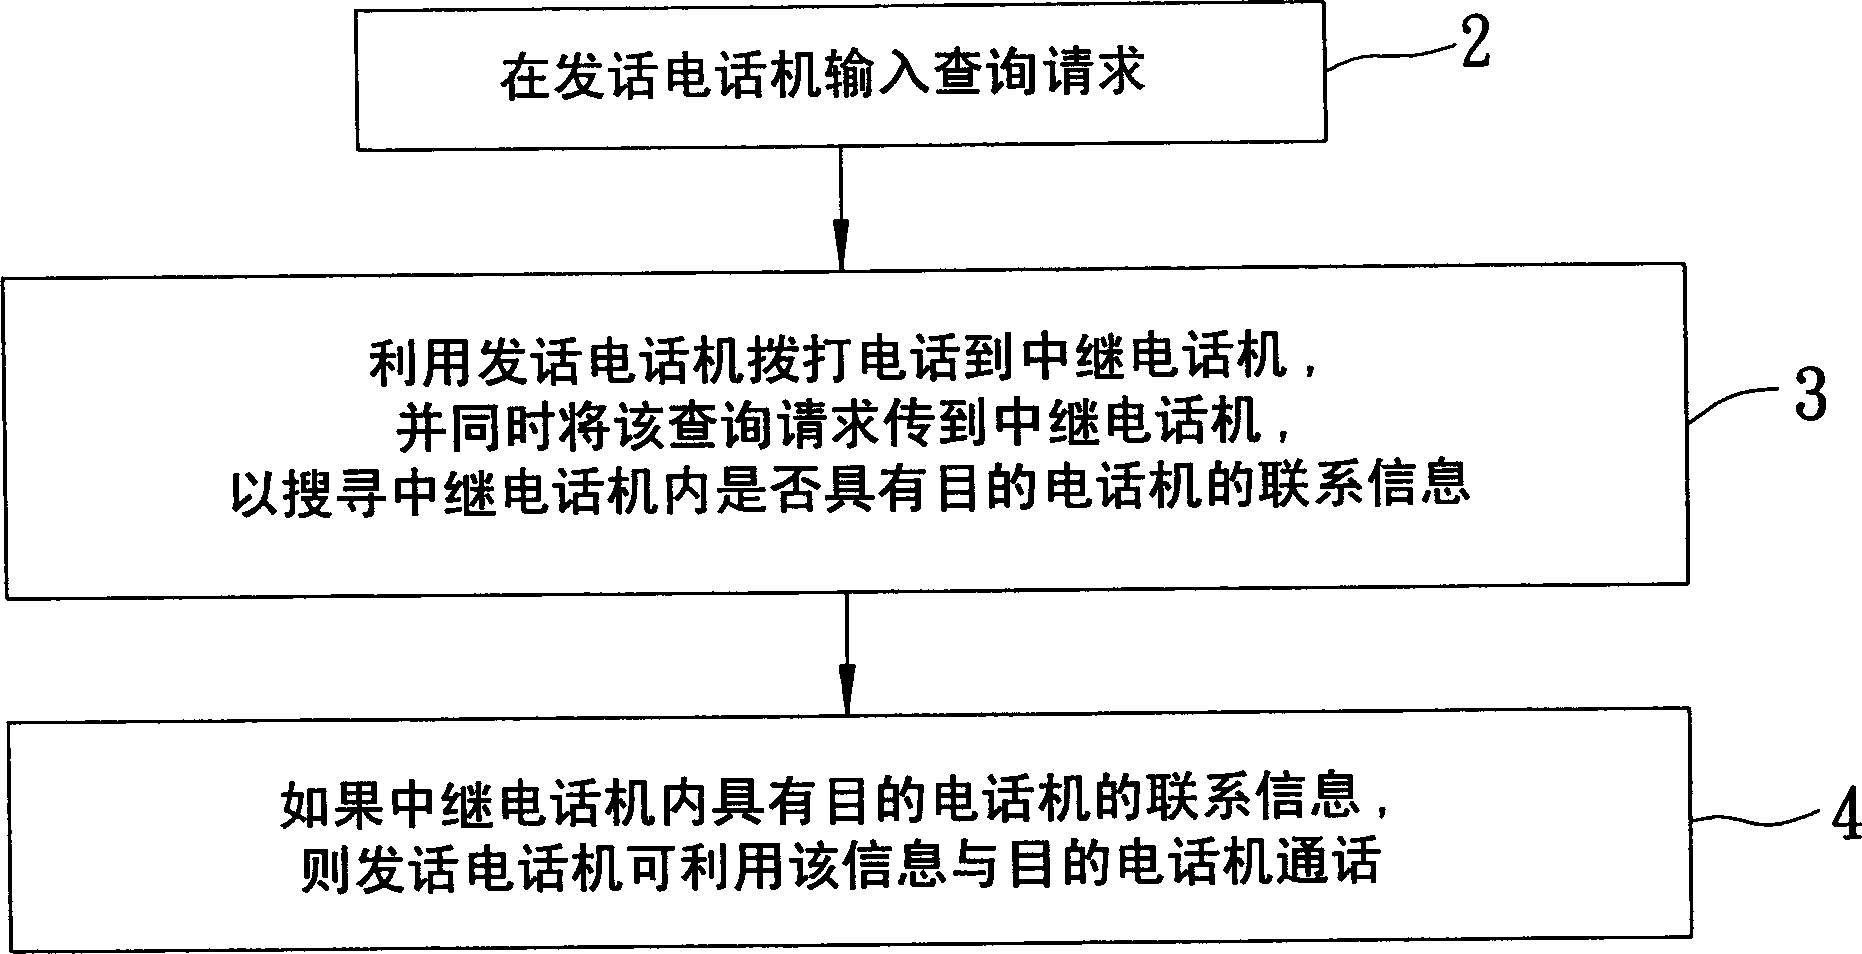 Method and application for making originating and goal telephone set call using relay telephone set